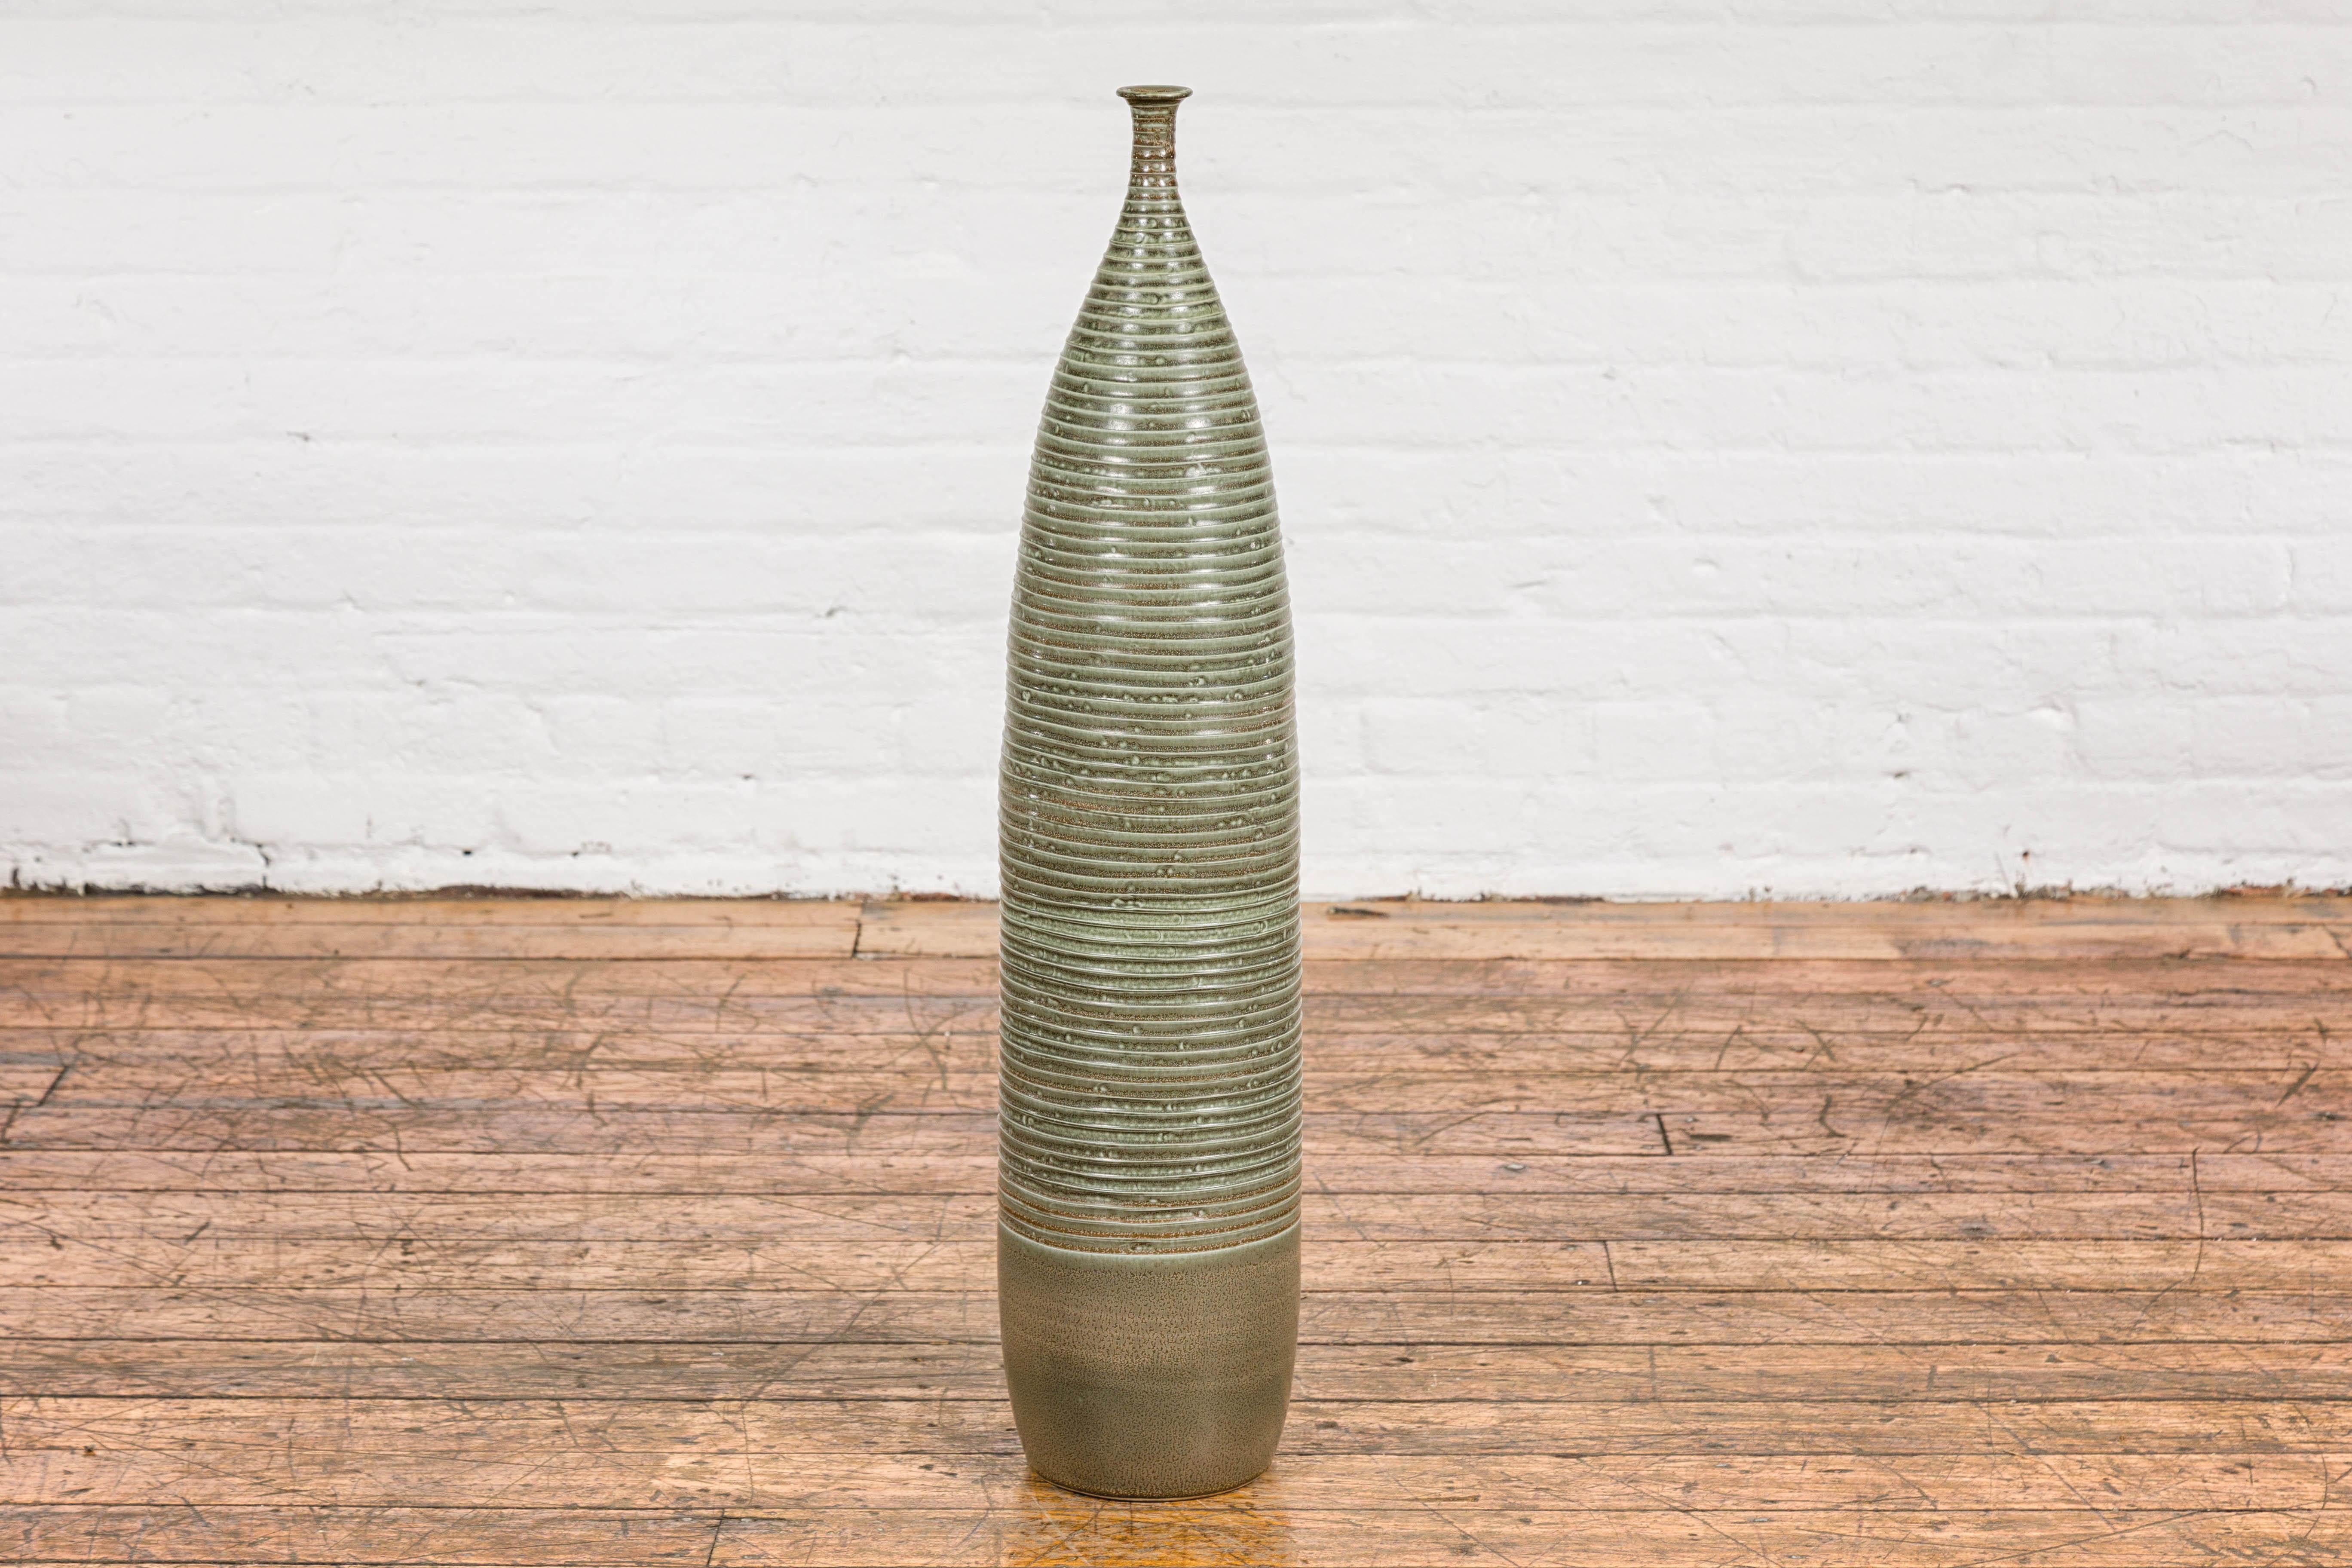 Tall and Slender Green Glazed Ceramic Vase with Reeded Design  In Good Condition For Sale In Yonkers, NY